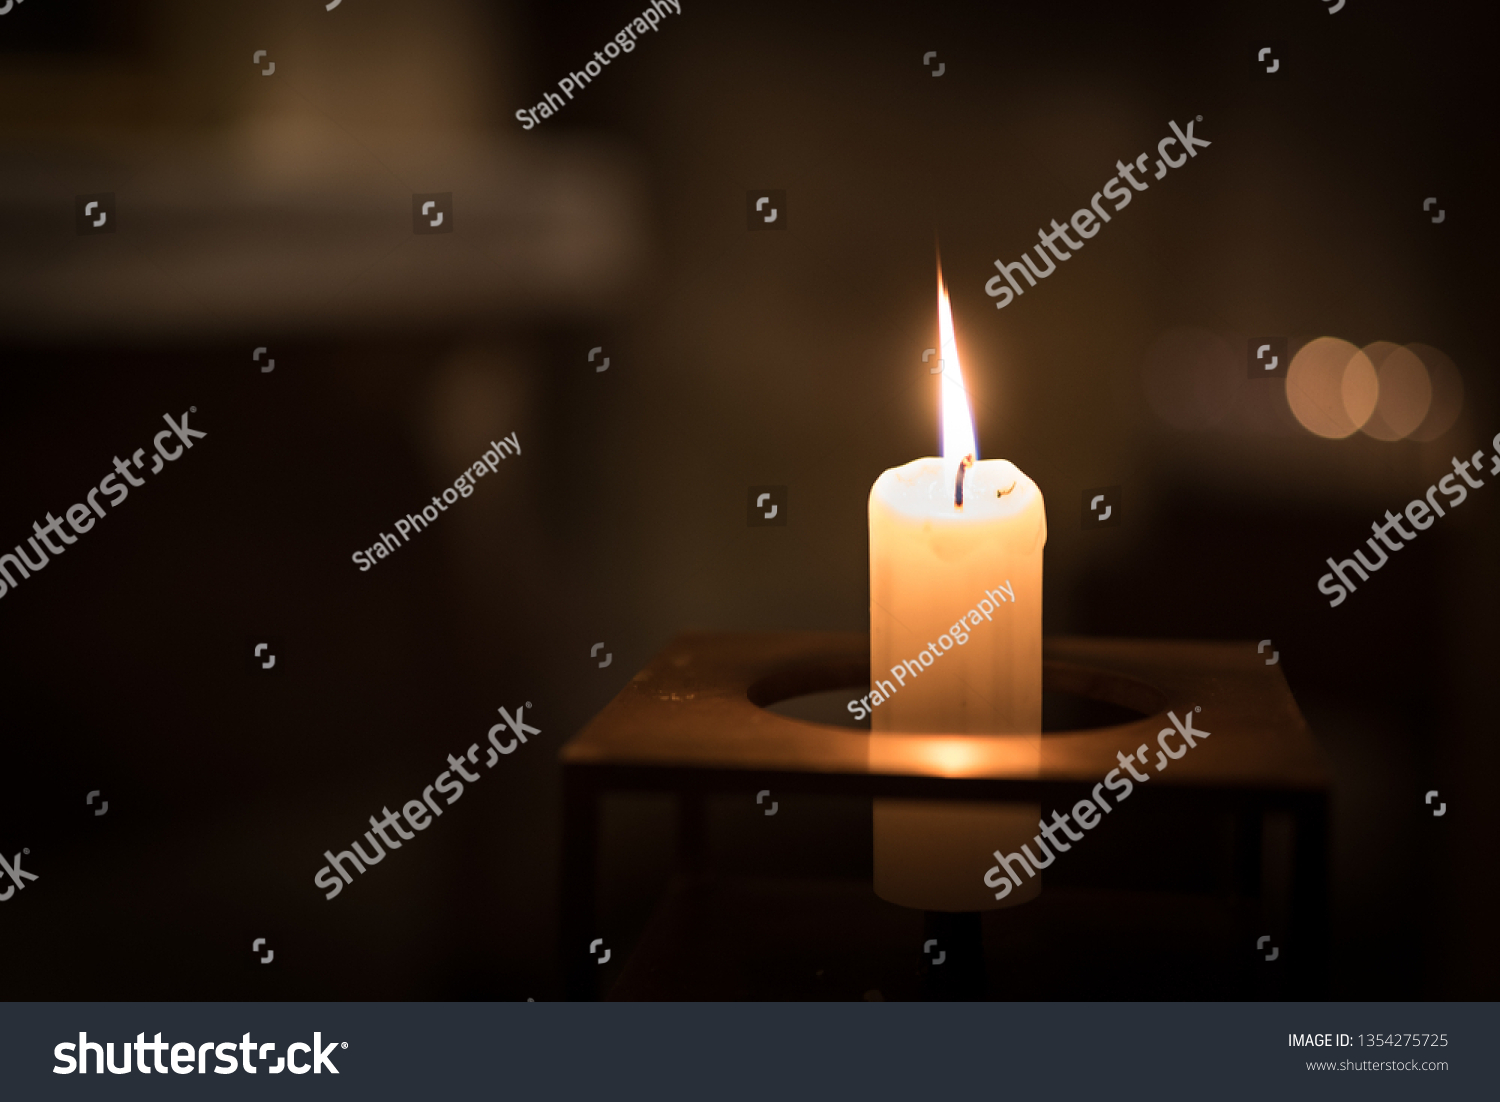 A single candle burning inside a church. The candle is made of pale wax and is in a square metal candle holder. The candle flame is sharp, and the background has soft bokeh. #1354275725